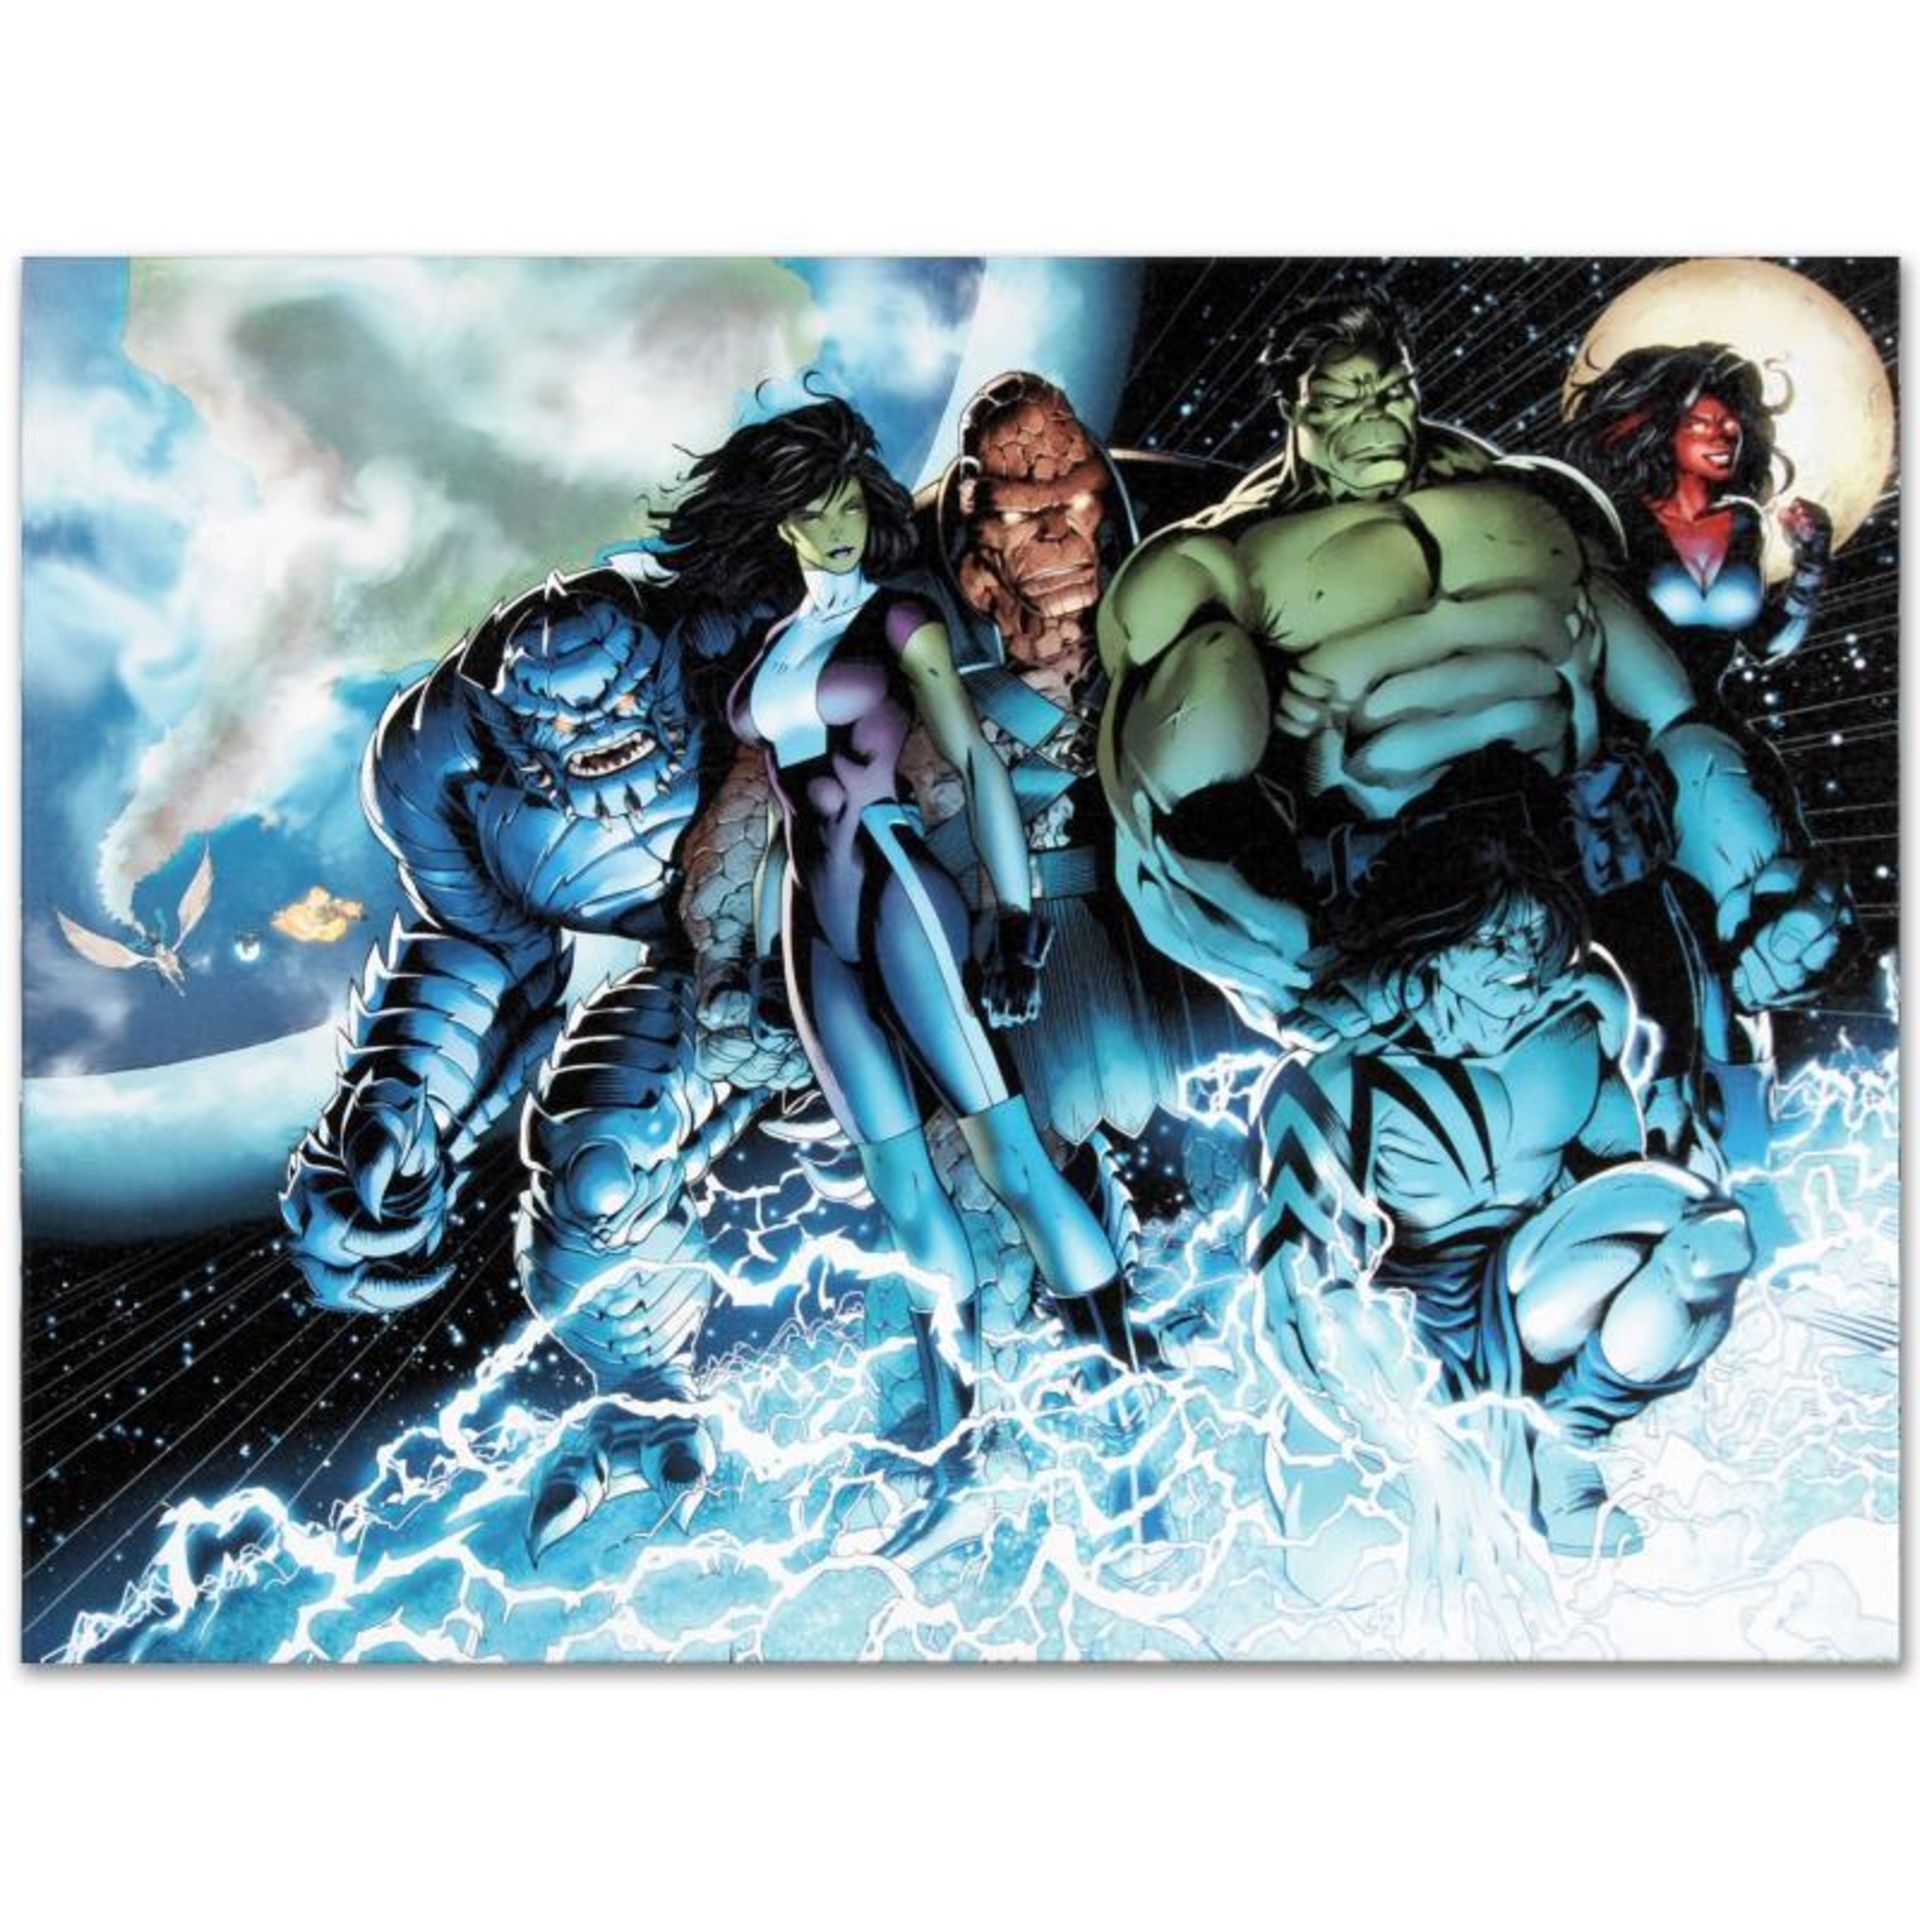 Marvel Comics "Incredible Hulks #615" Numbered Limited Edition Giclee on Canvas